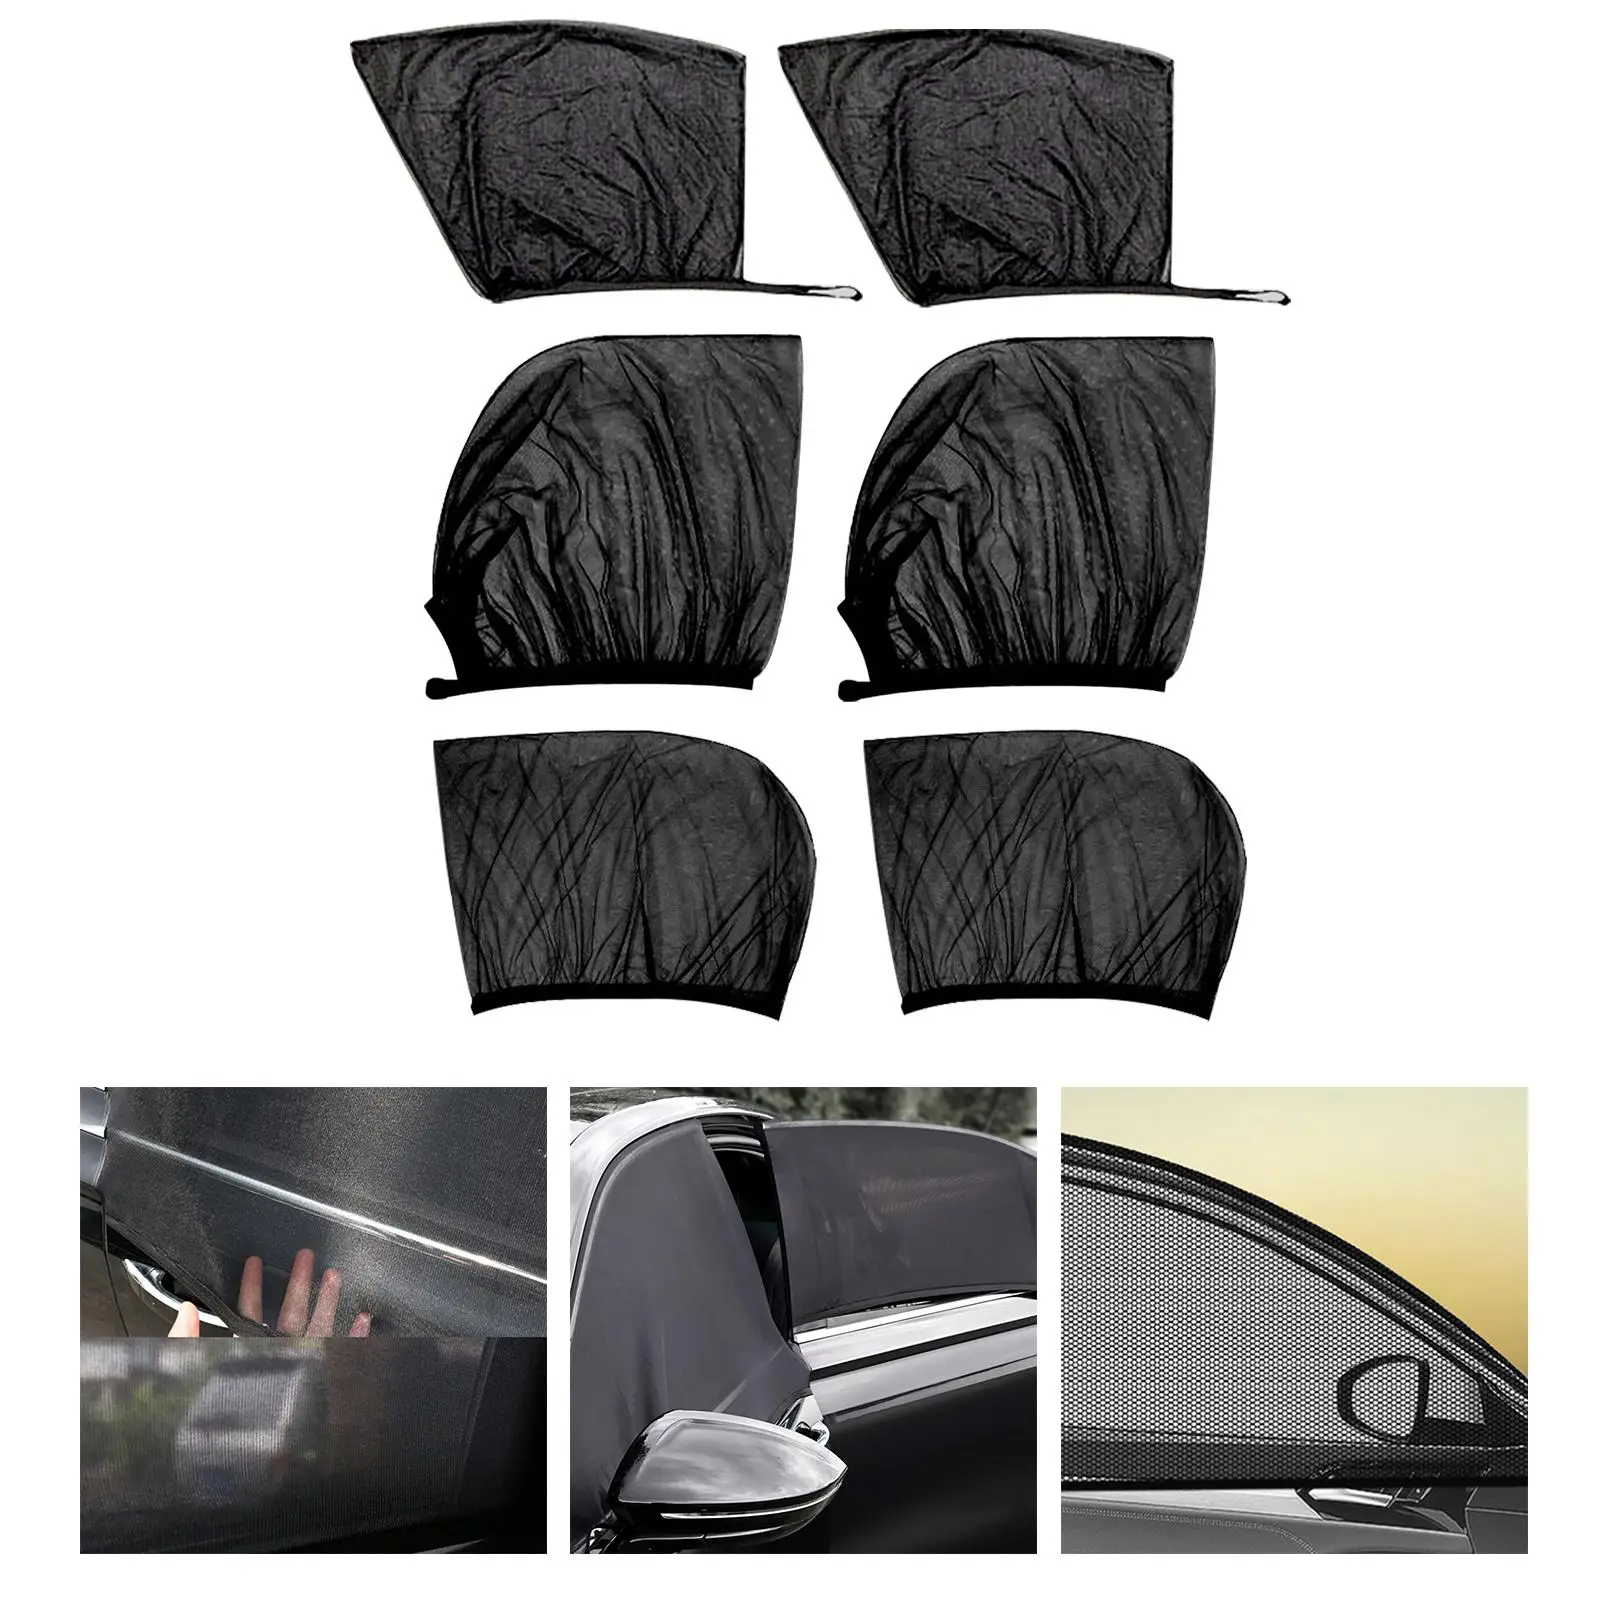 Car Window Shades Auto Car Interior Accessories Mesh Universal Blackout Covers Keep Passengers, Pets and Car Interior Cool